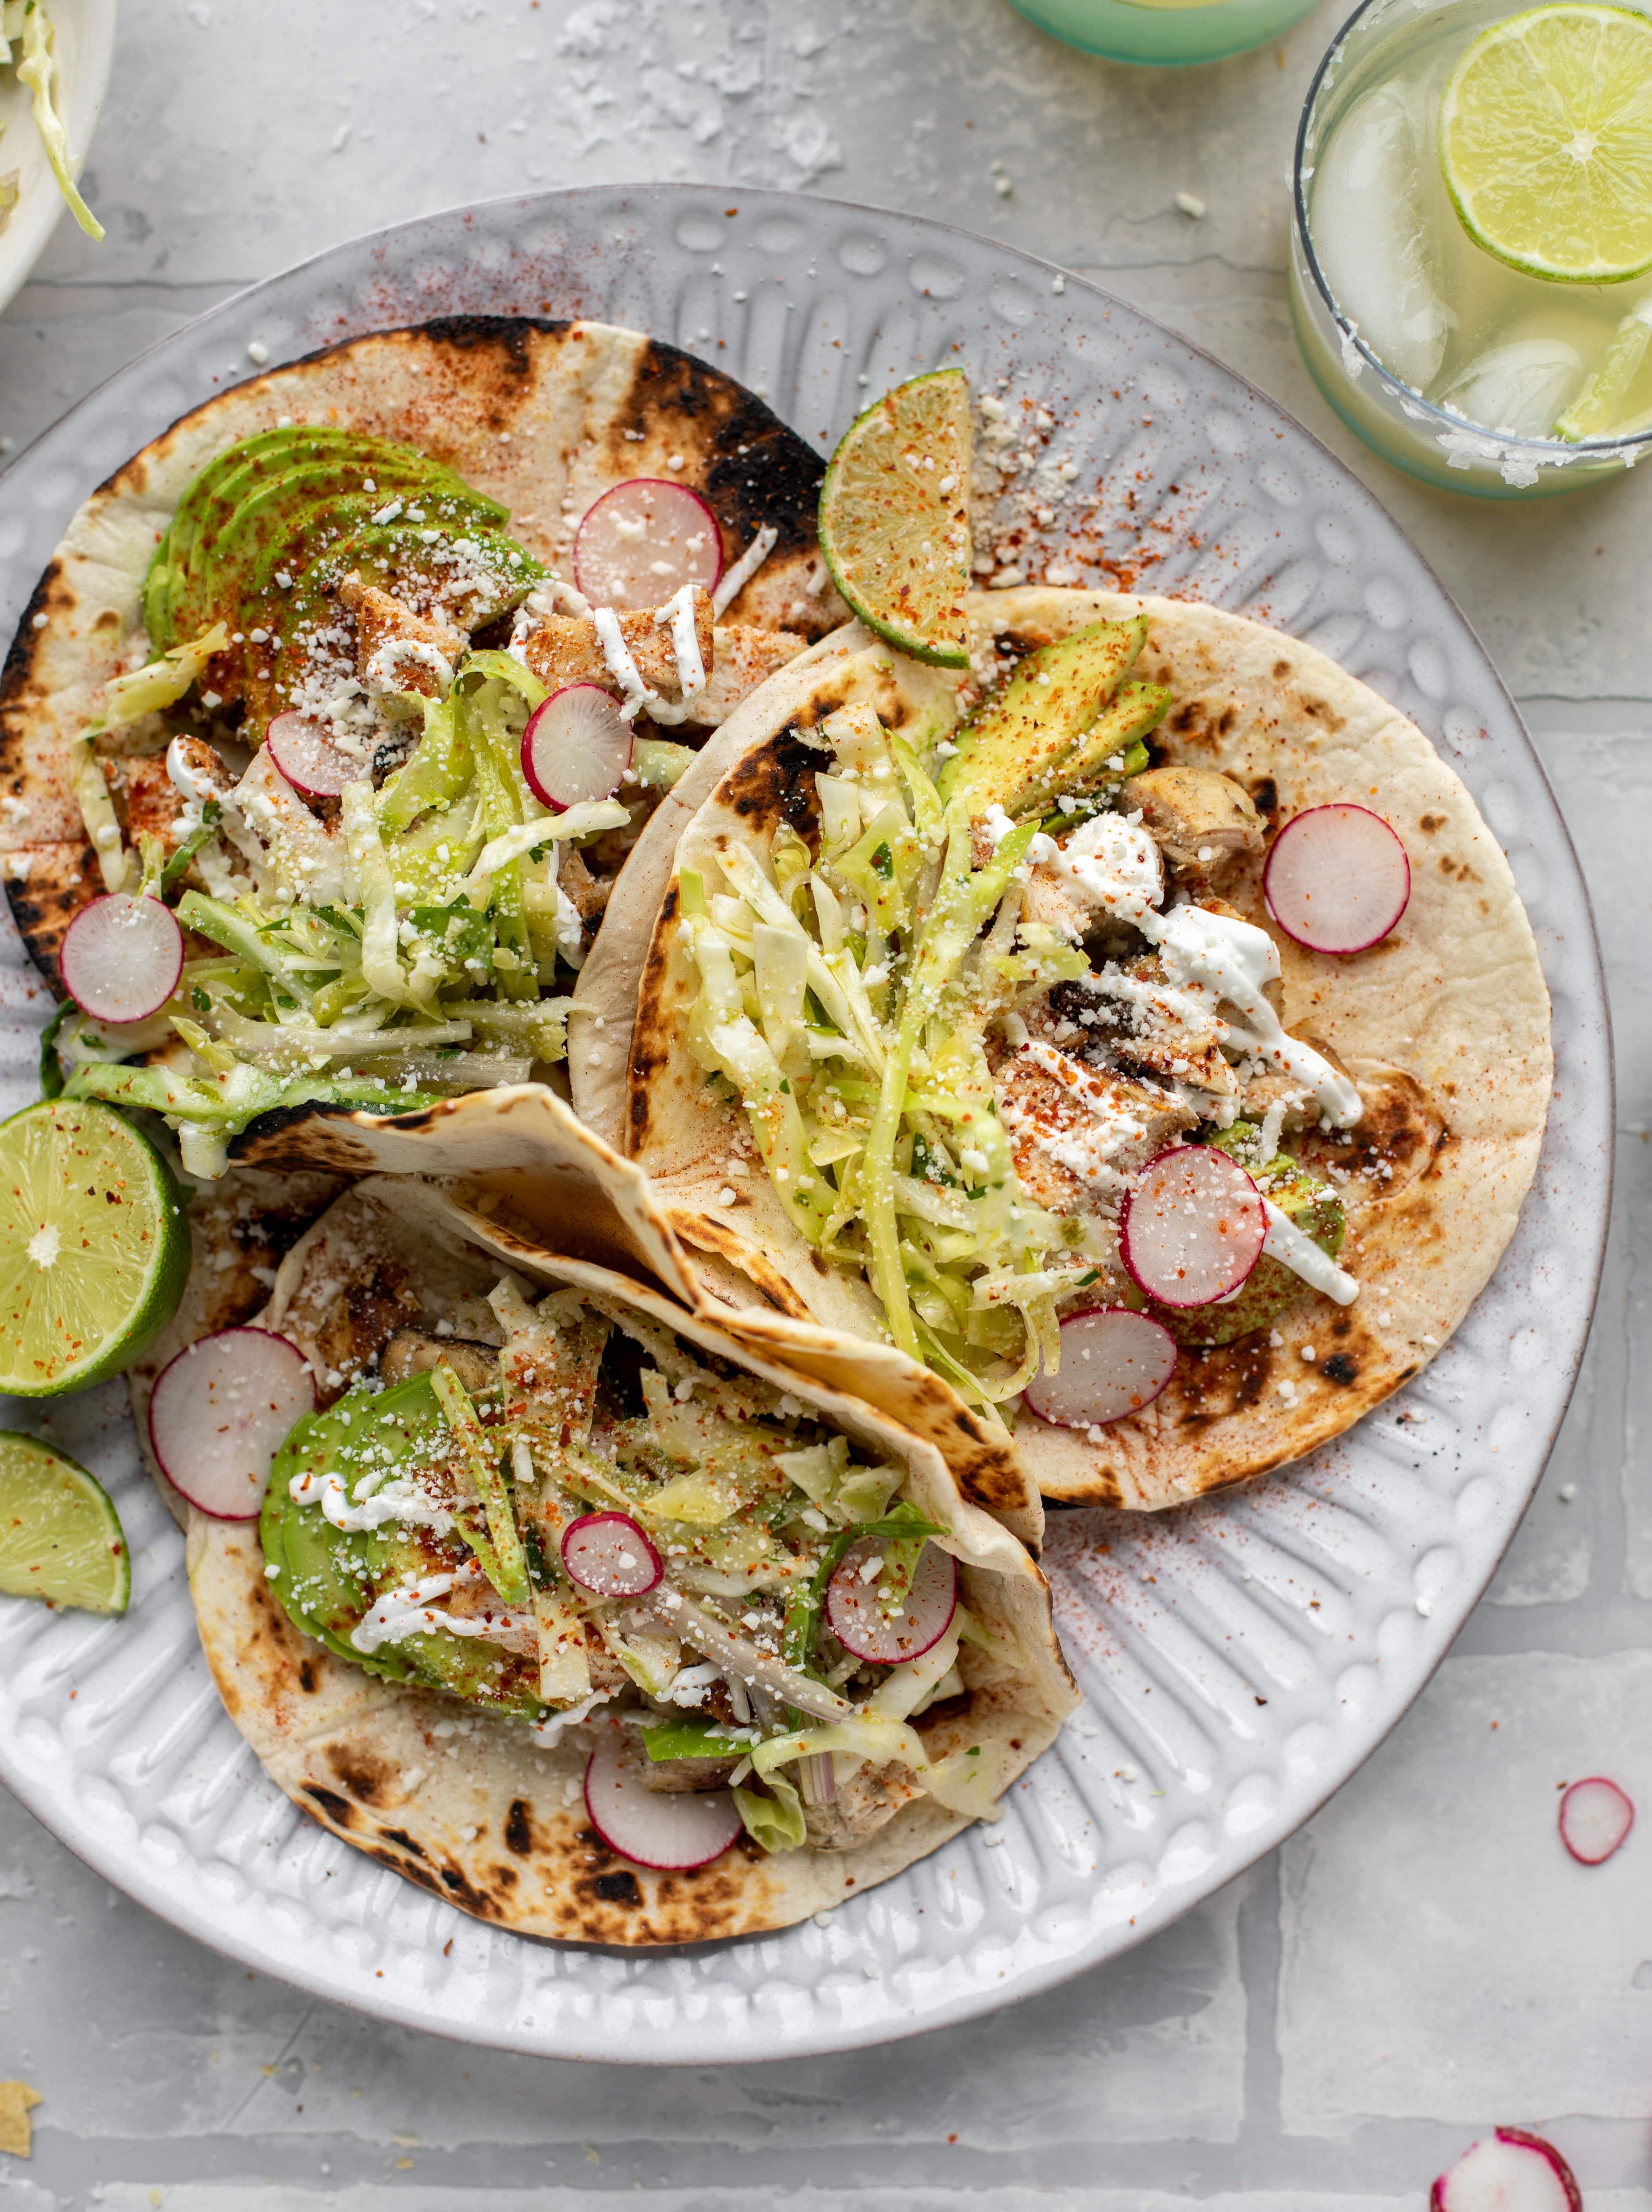 These grilled chicken tacos are easy and flavorful. They are super smoky, then topped with a key lime slaw that is absolutely delicious!